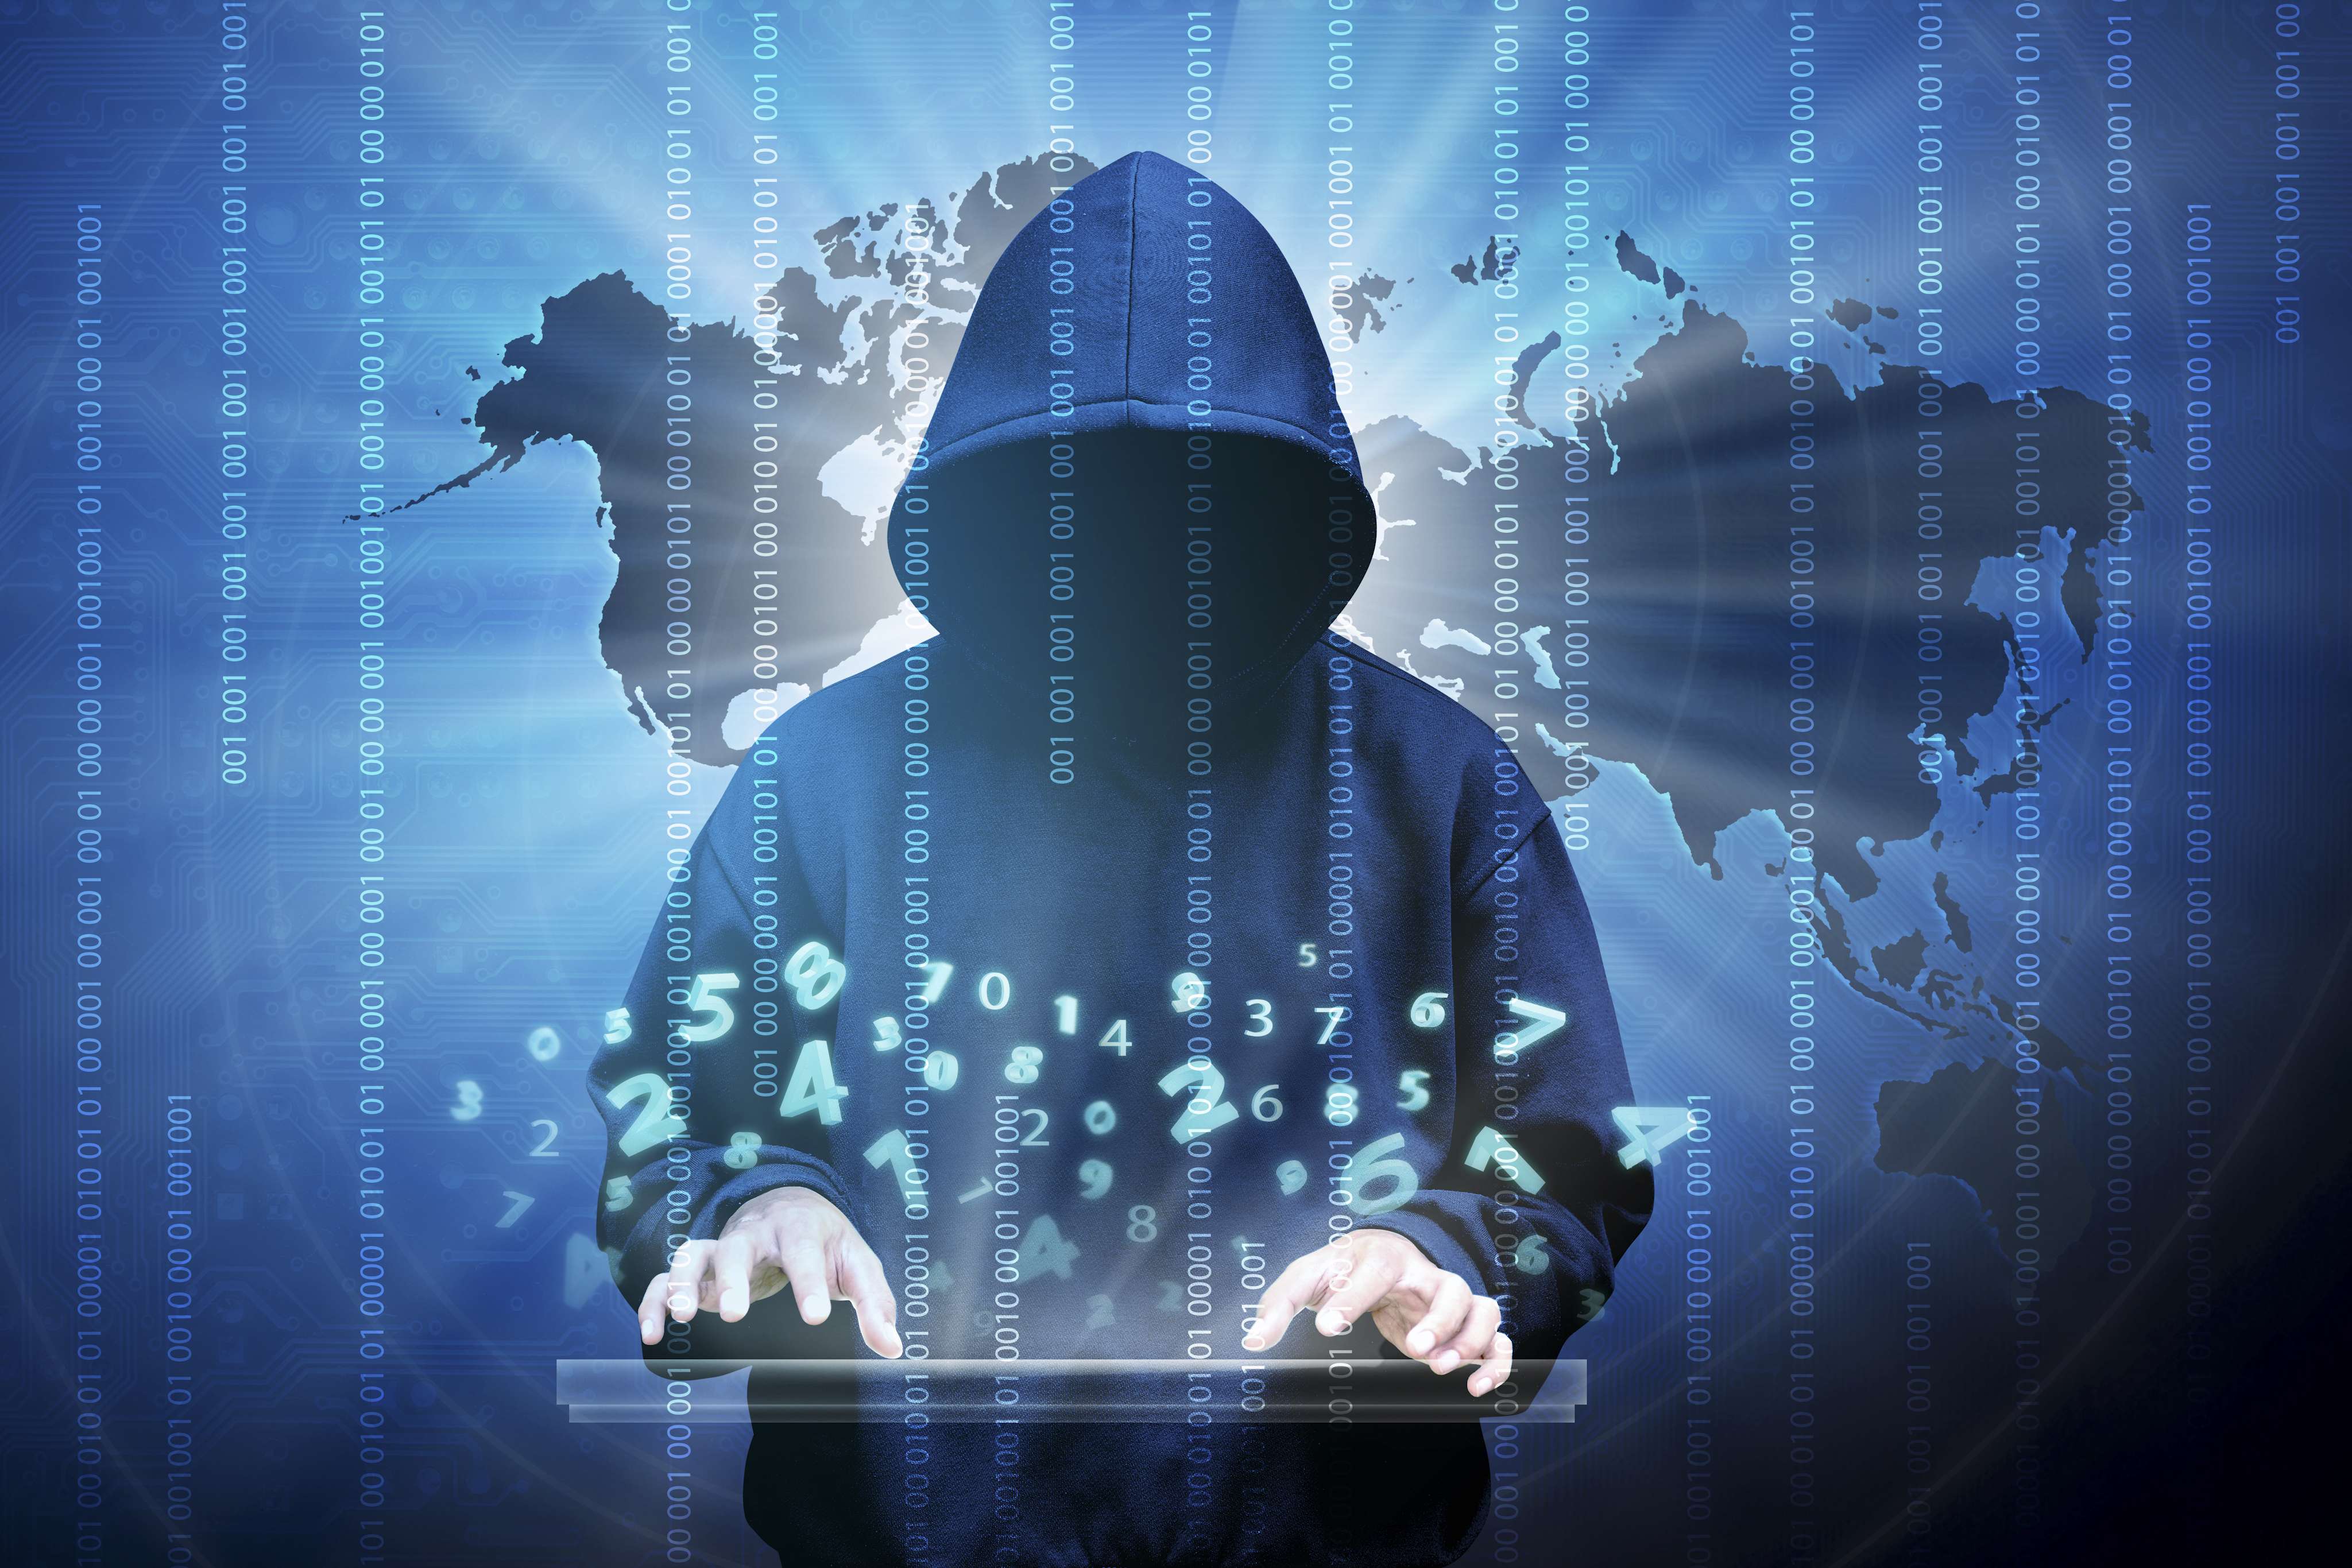 Hacking is no longer the exclusive domain of criminals. Photo: Shutterstock